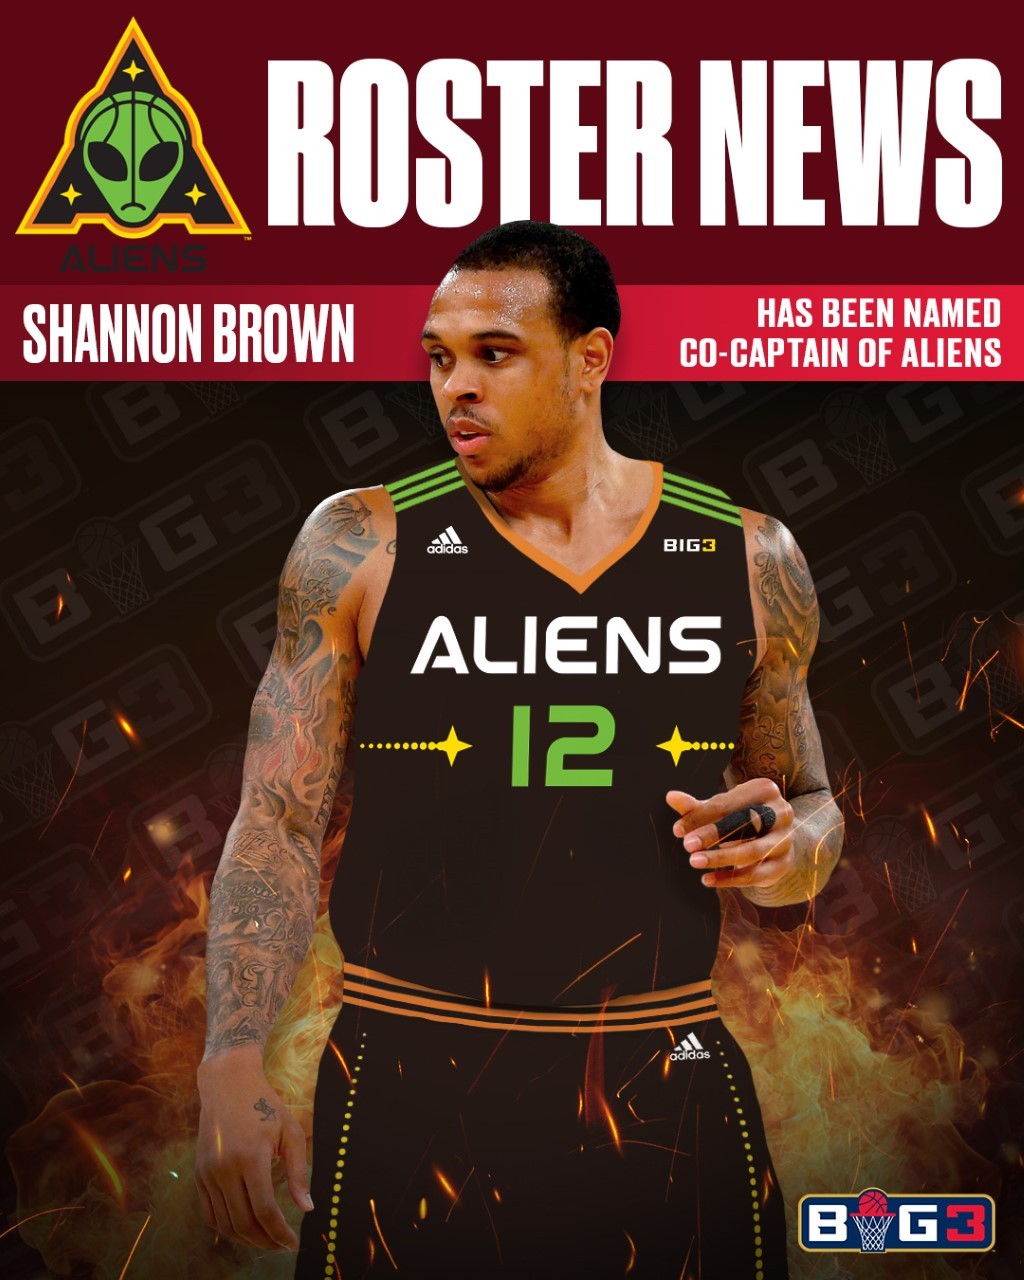 Shannon Brown Named CoCaptain of Aliens BIG3